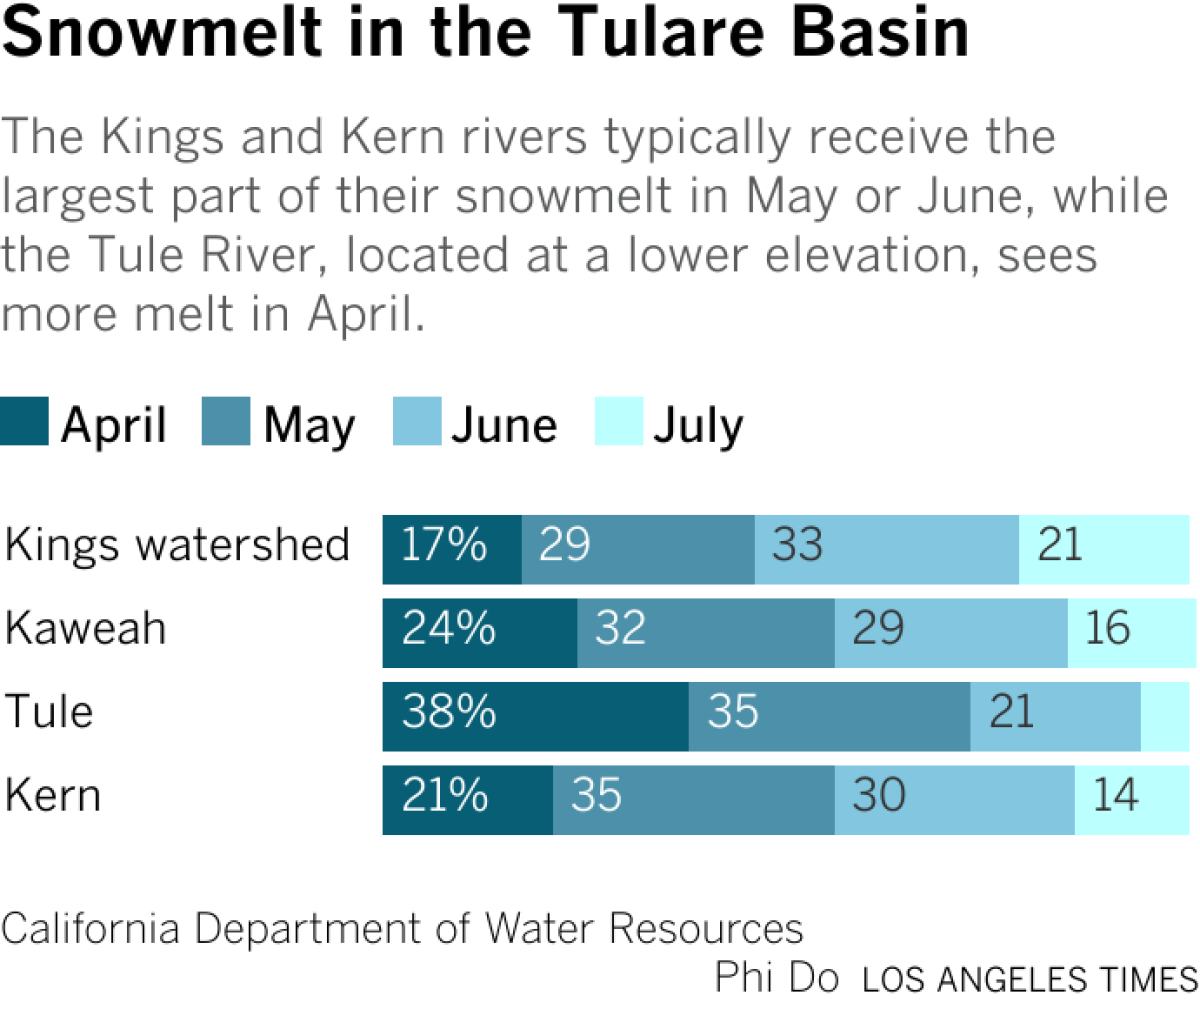 The Kings and Kern rivers typically receive the largest part of their snowmelt in May or June, while the Tule River, located at a lower elevation, sees more melt in April.